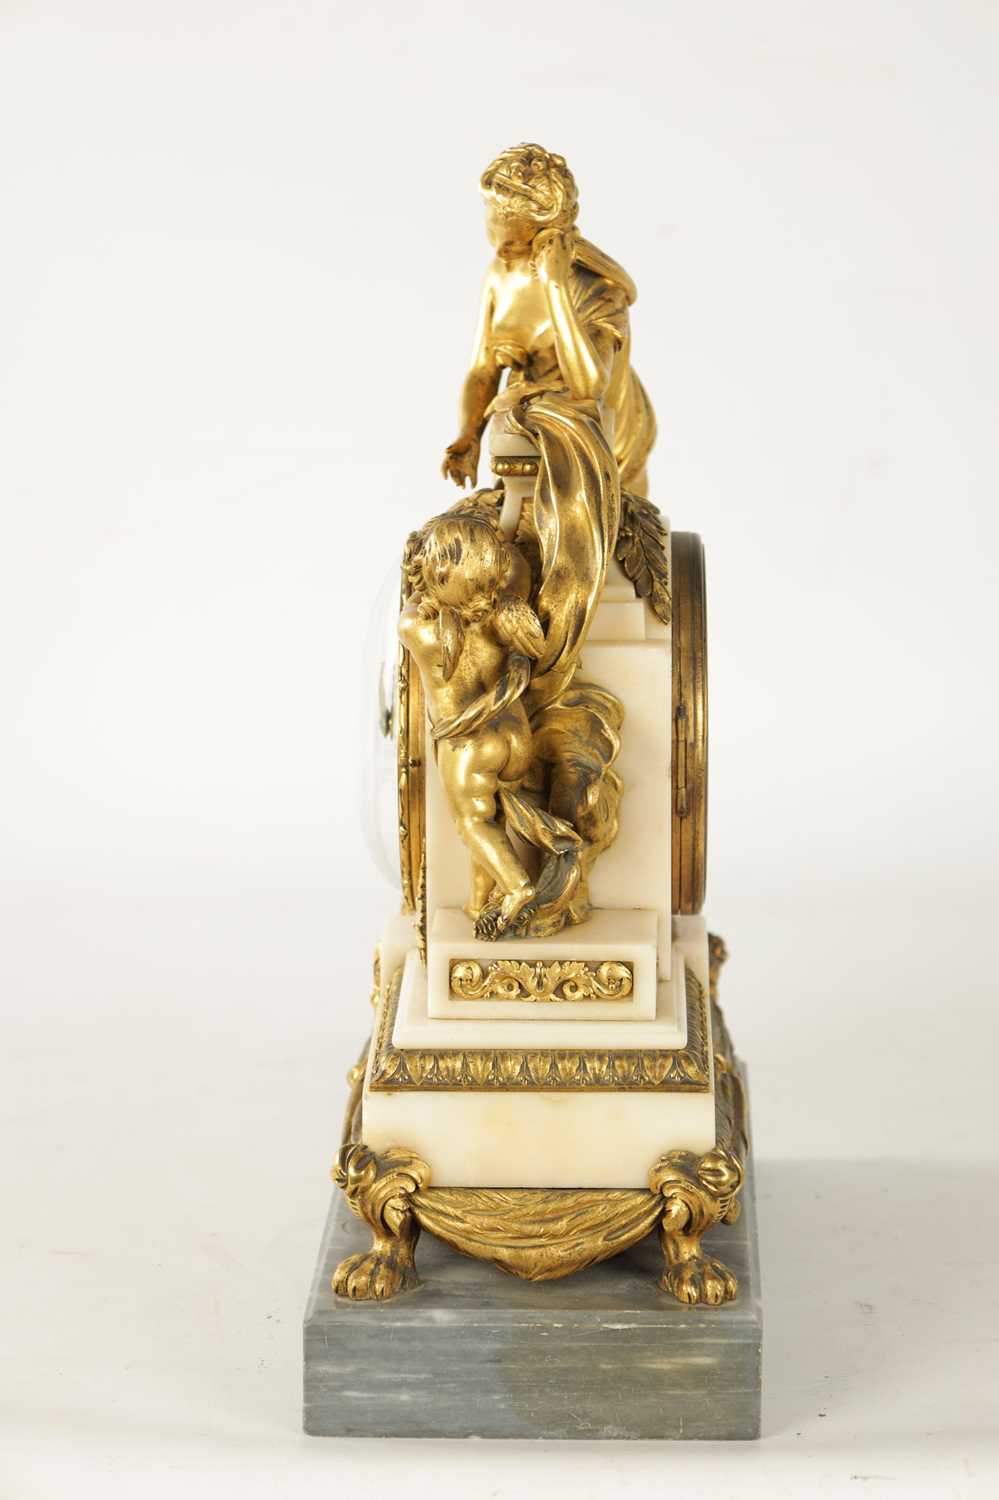 CHARLES LEROY, A PARIS. A FRENCH LOUIS XVI ORMOLU AND MARBLE FIGURAL MANTEL CLOCK - Image 10 of 11